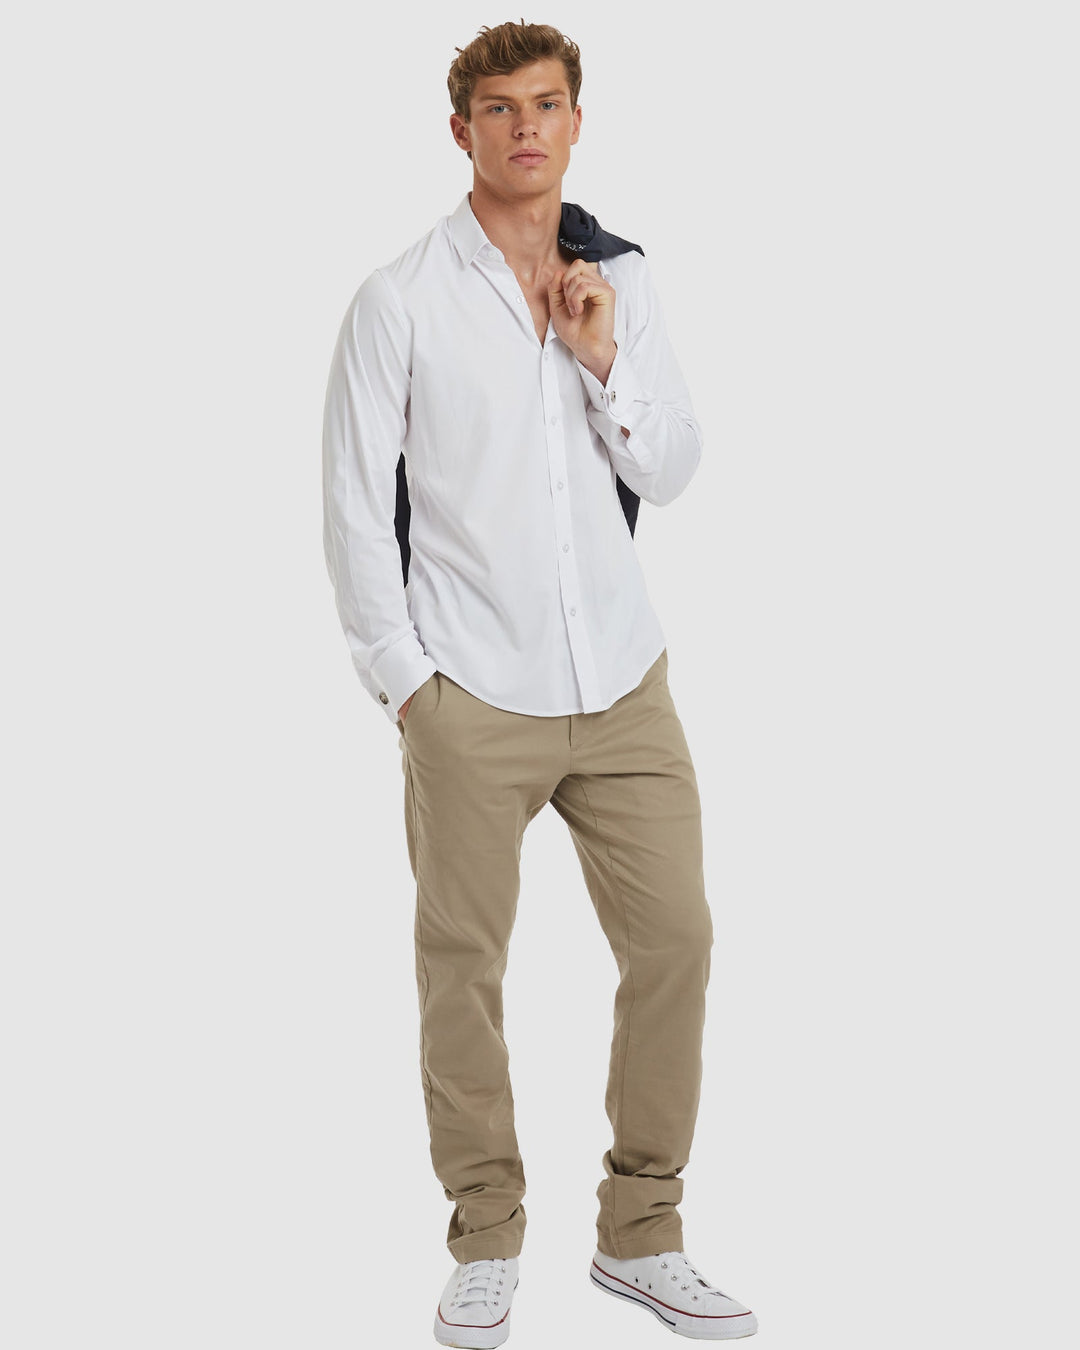 Paris Formal White Shirt with Non Iron Cotton and French Cuffs - Slim Fit